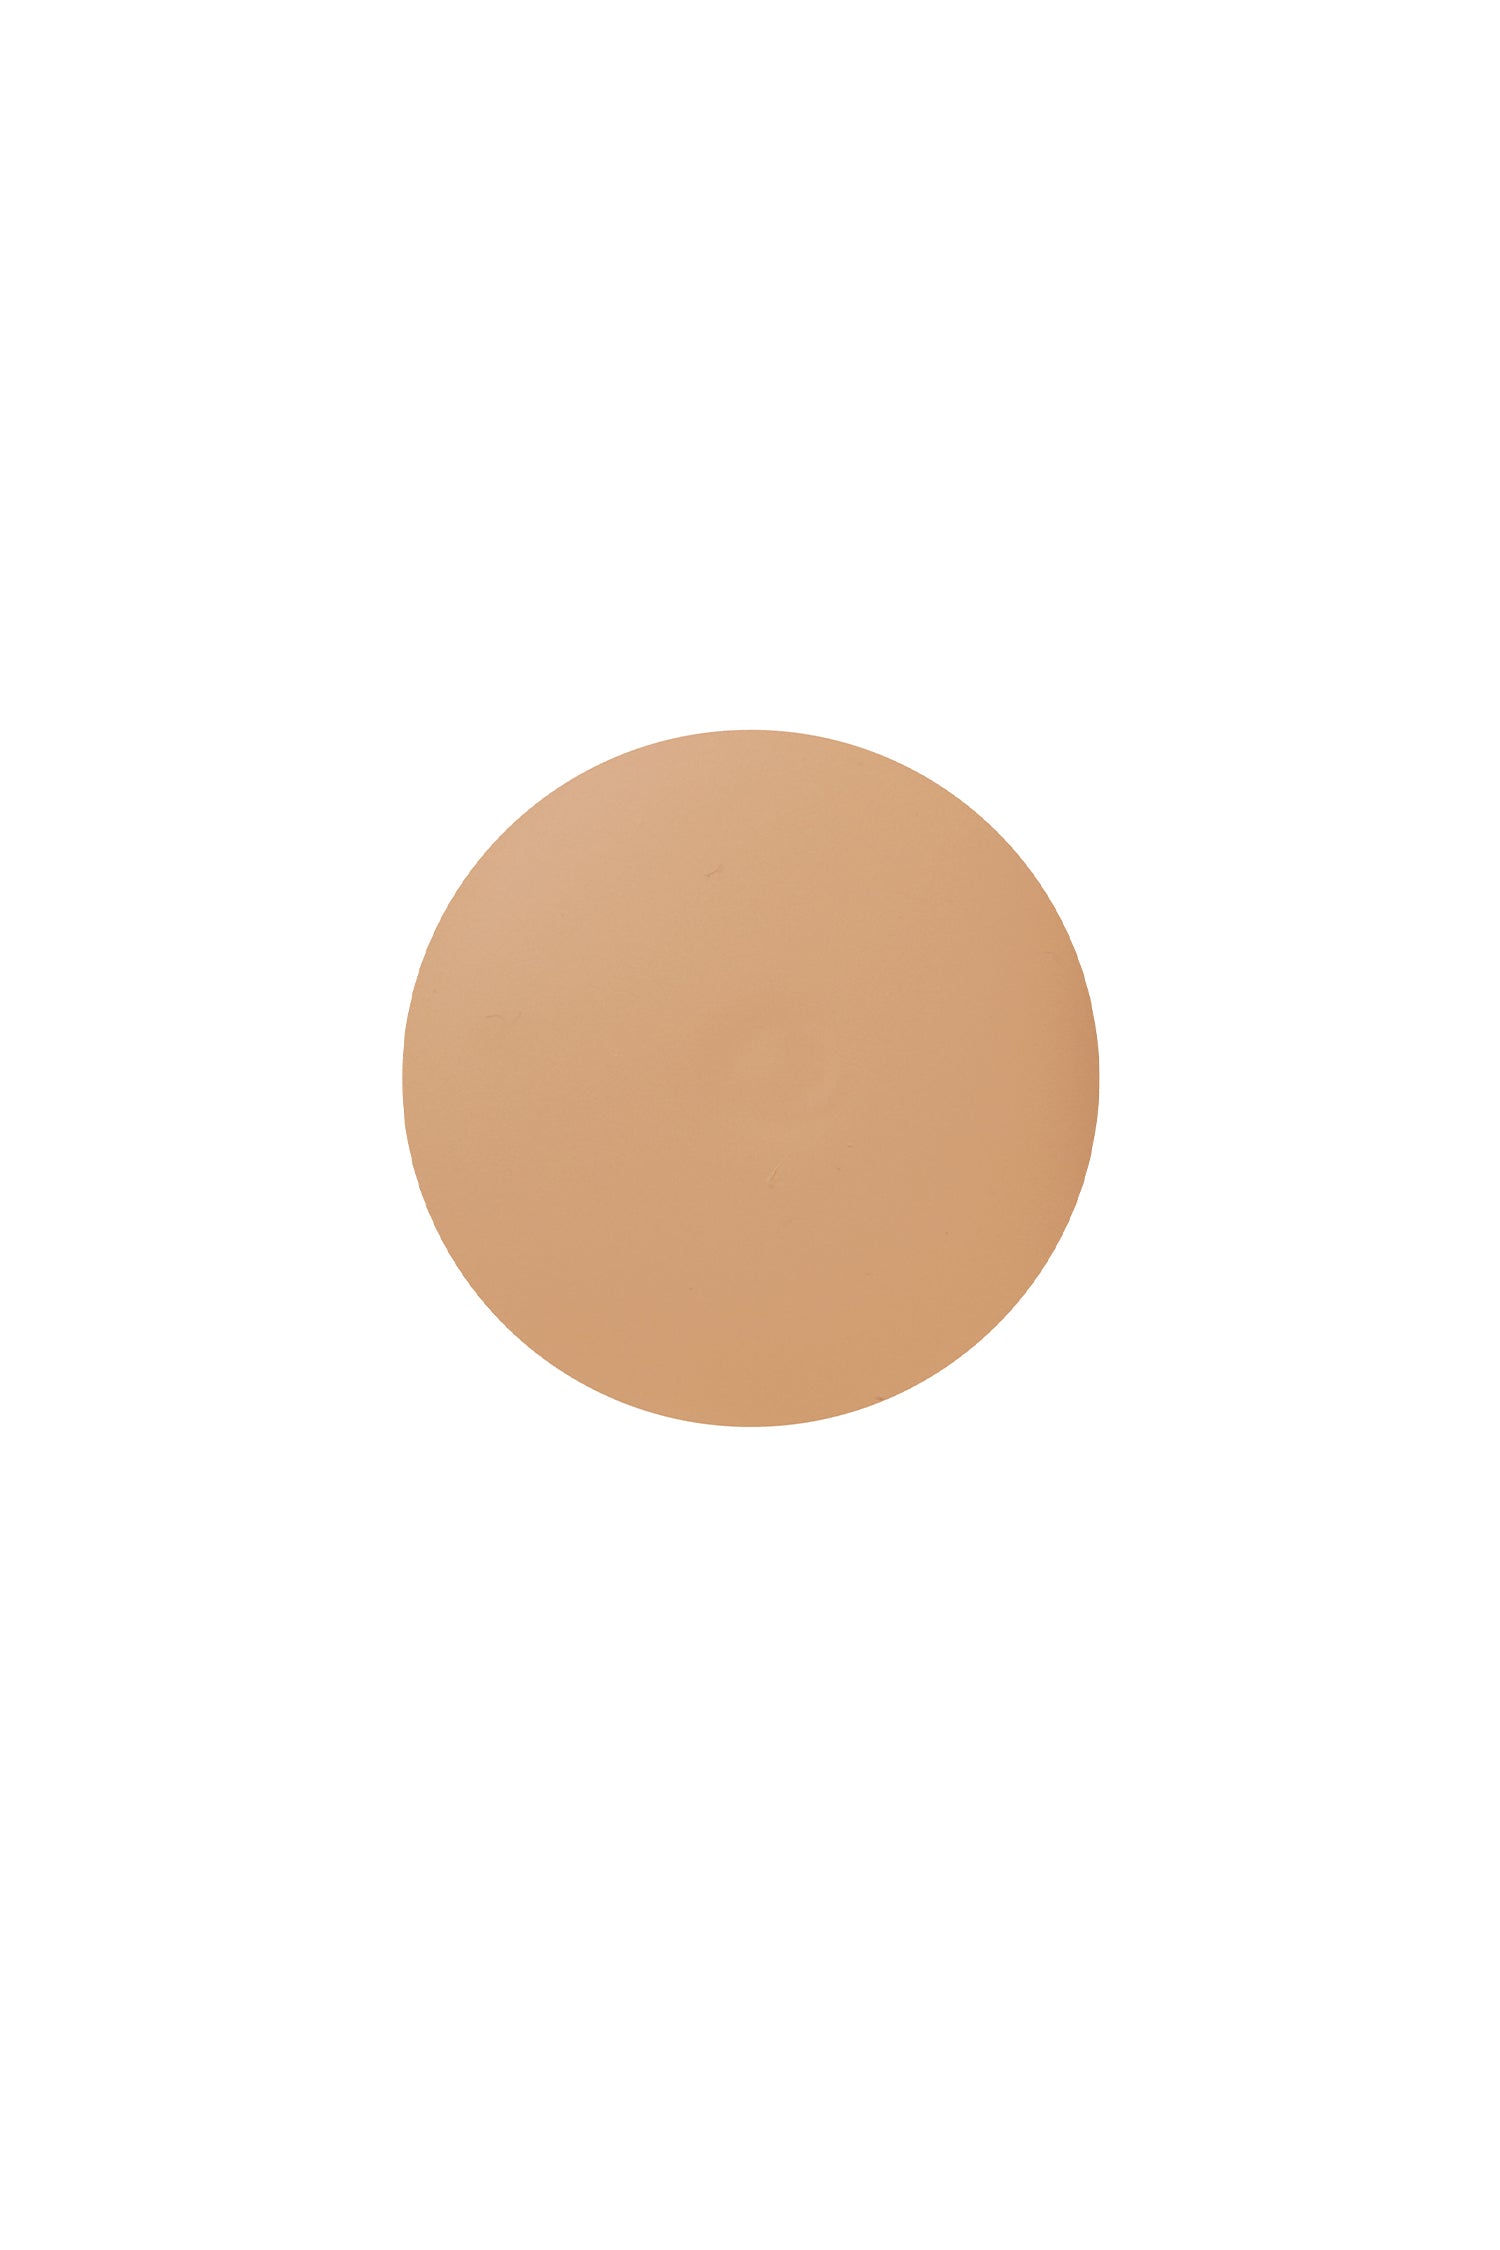 Introducing our newest MEDIUM foundation compact refill, that will create a flawless doll-like look